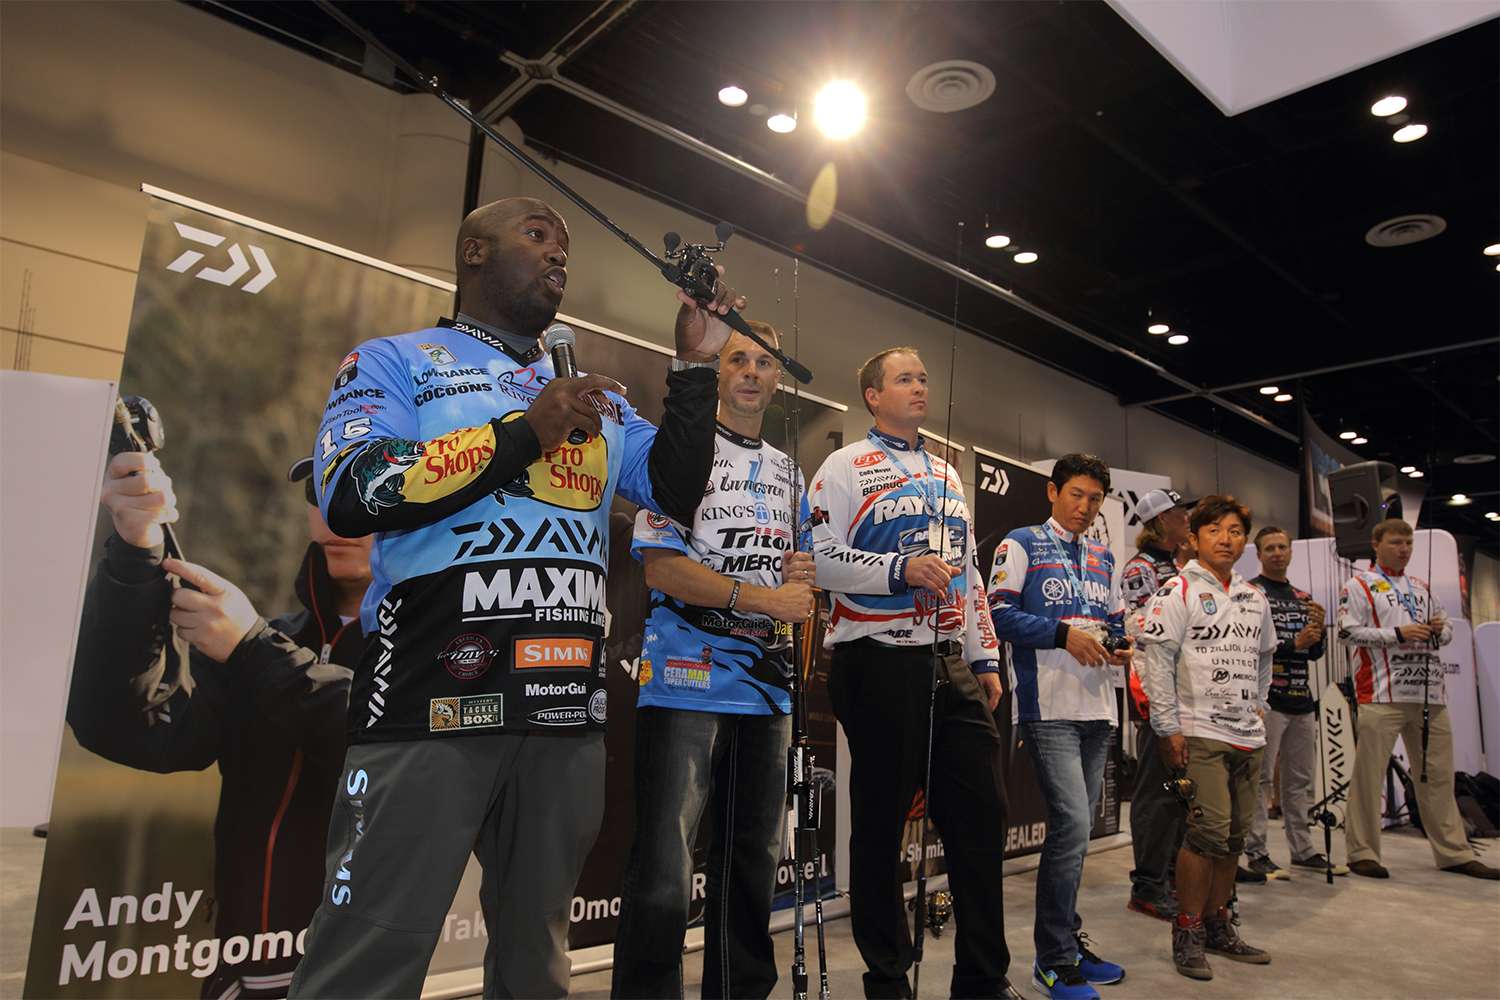 The Team Daiwa anglers all got together on Day 2 of ICAST.